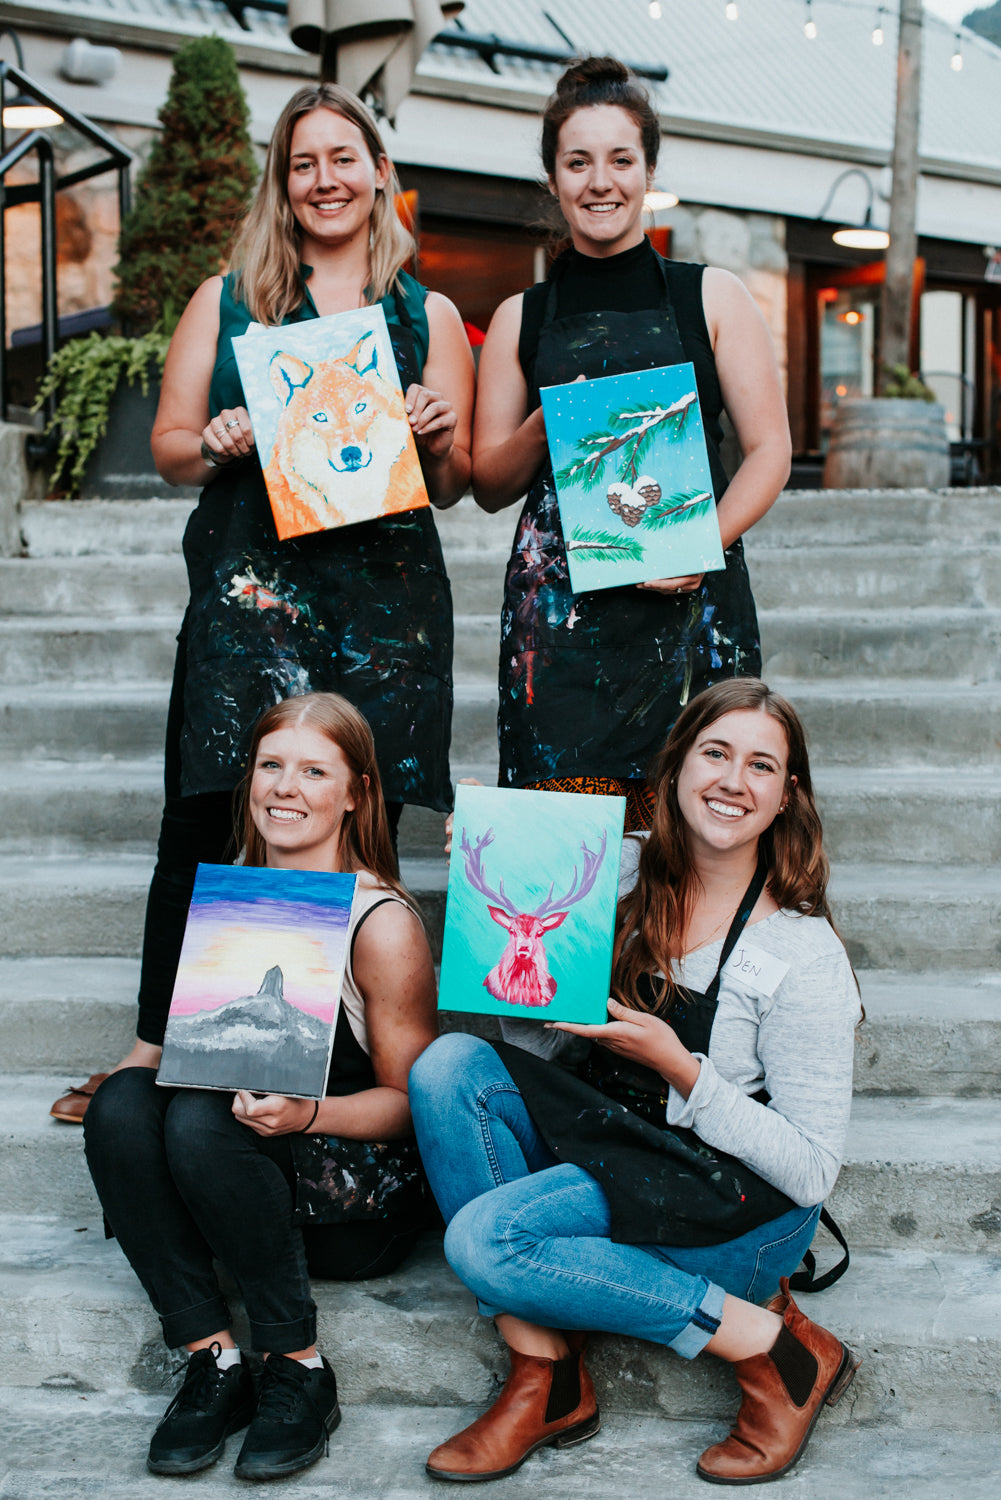 Ladies holding finished paintings after Whistler artist Andrea Mueller's paint night